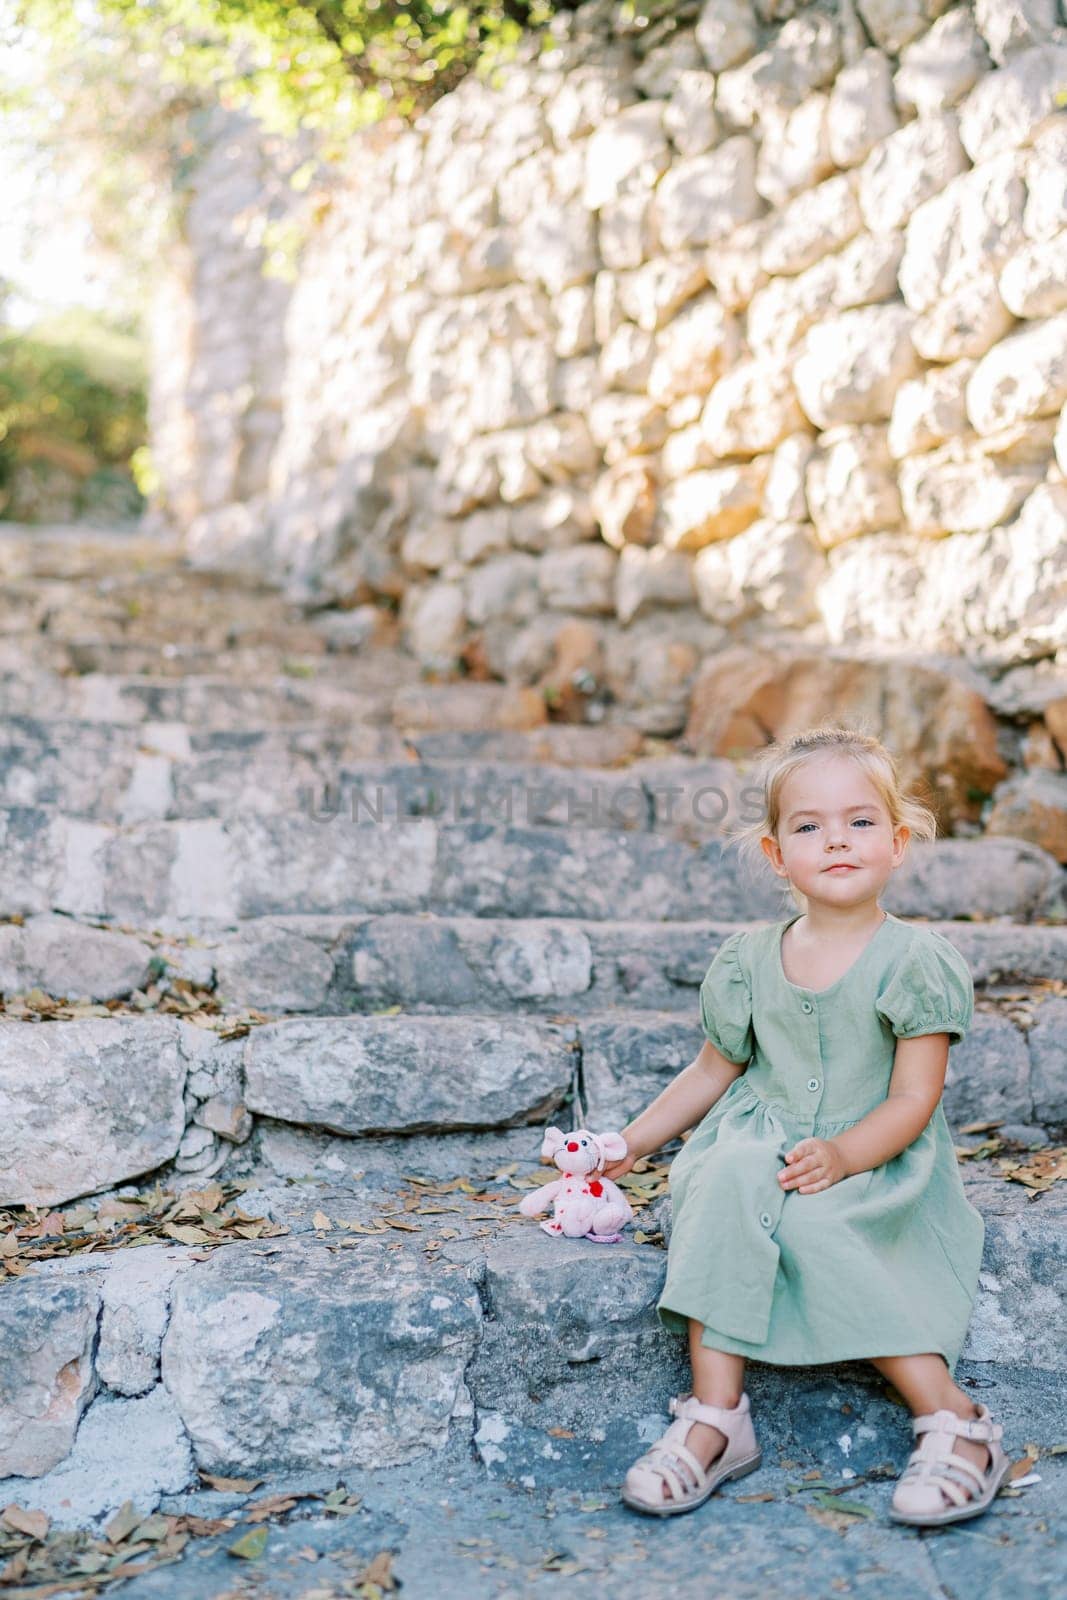 Little smiling girl with toy pink mouse sitting on old stone steps in the garden. High quality photo